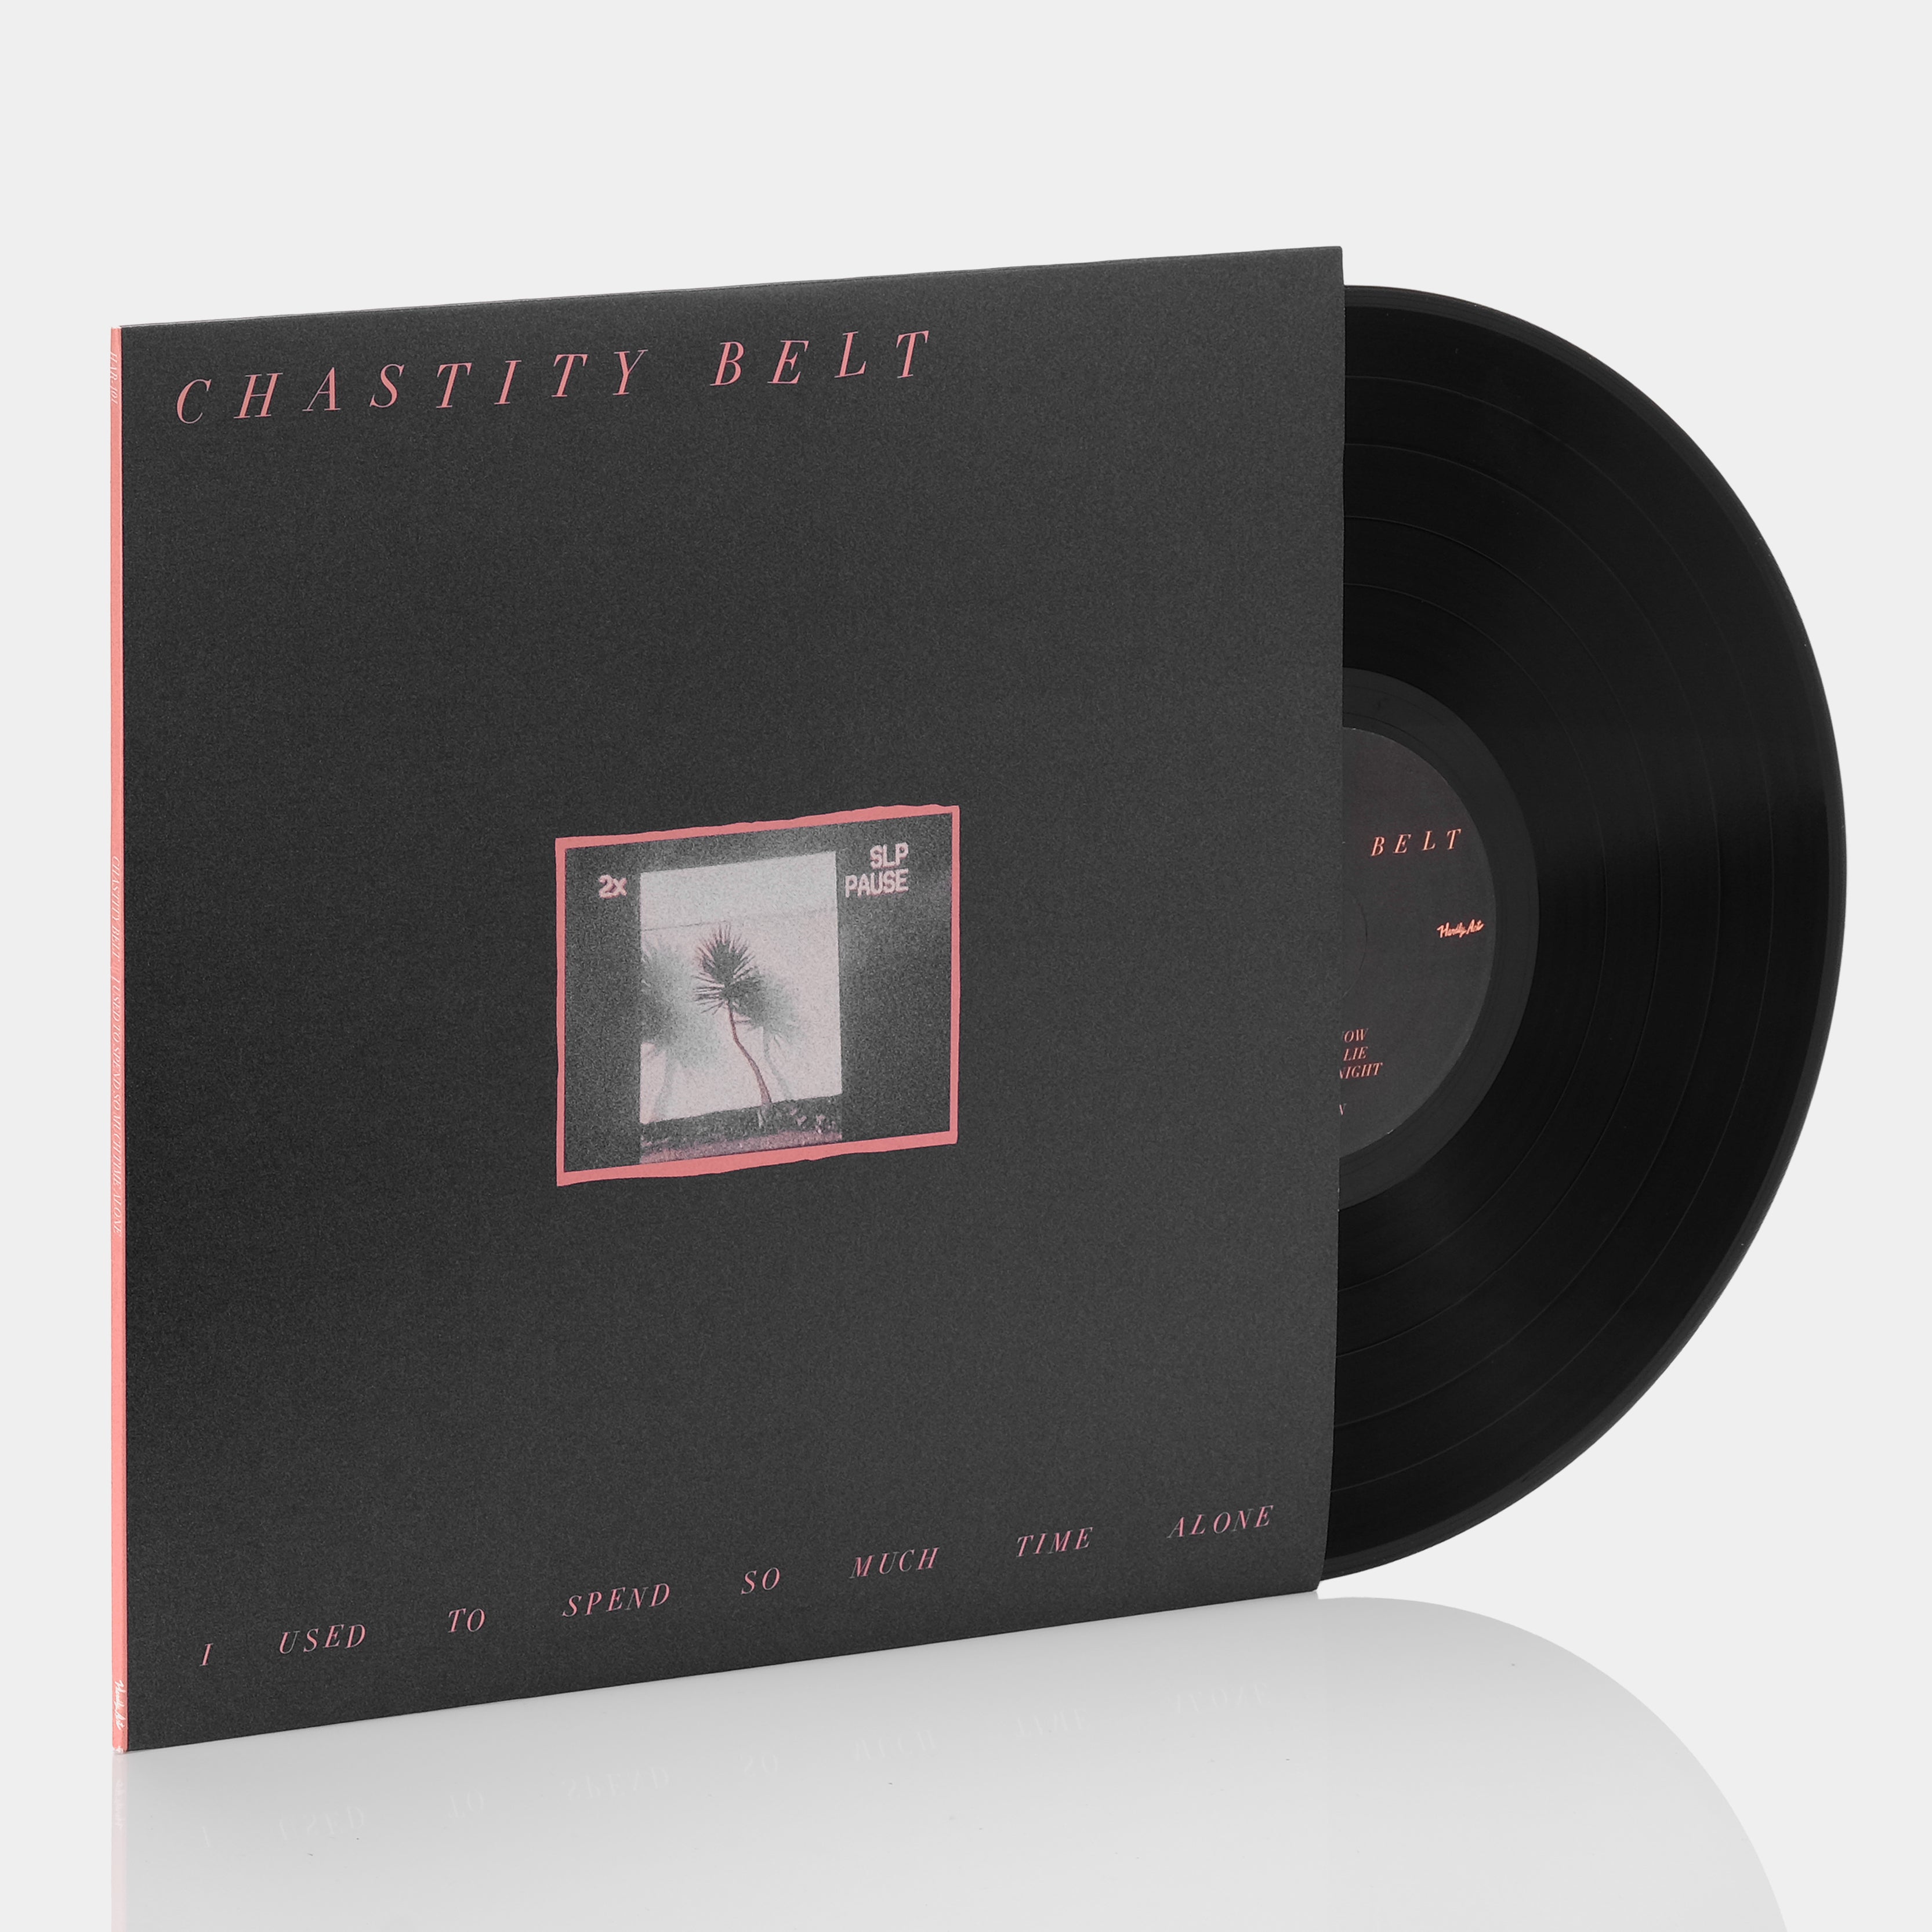 Chastity Belt - I Used To Spend So Much Time Alone LP Vinyl Record